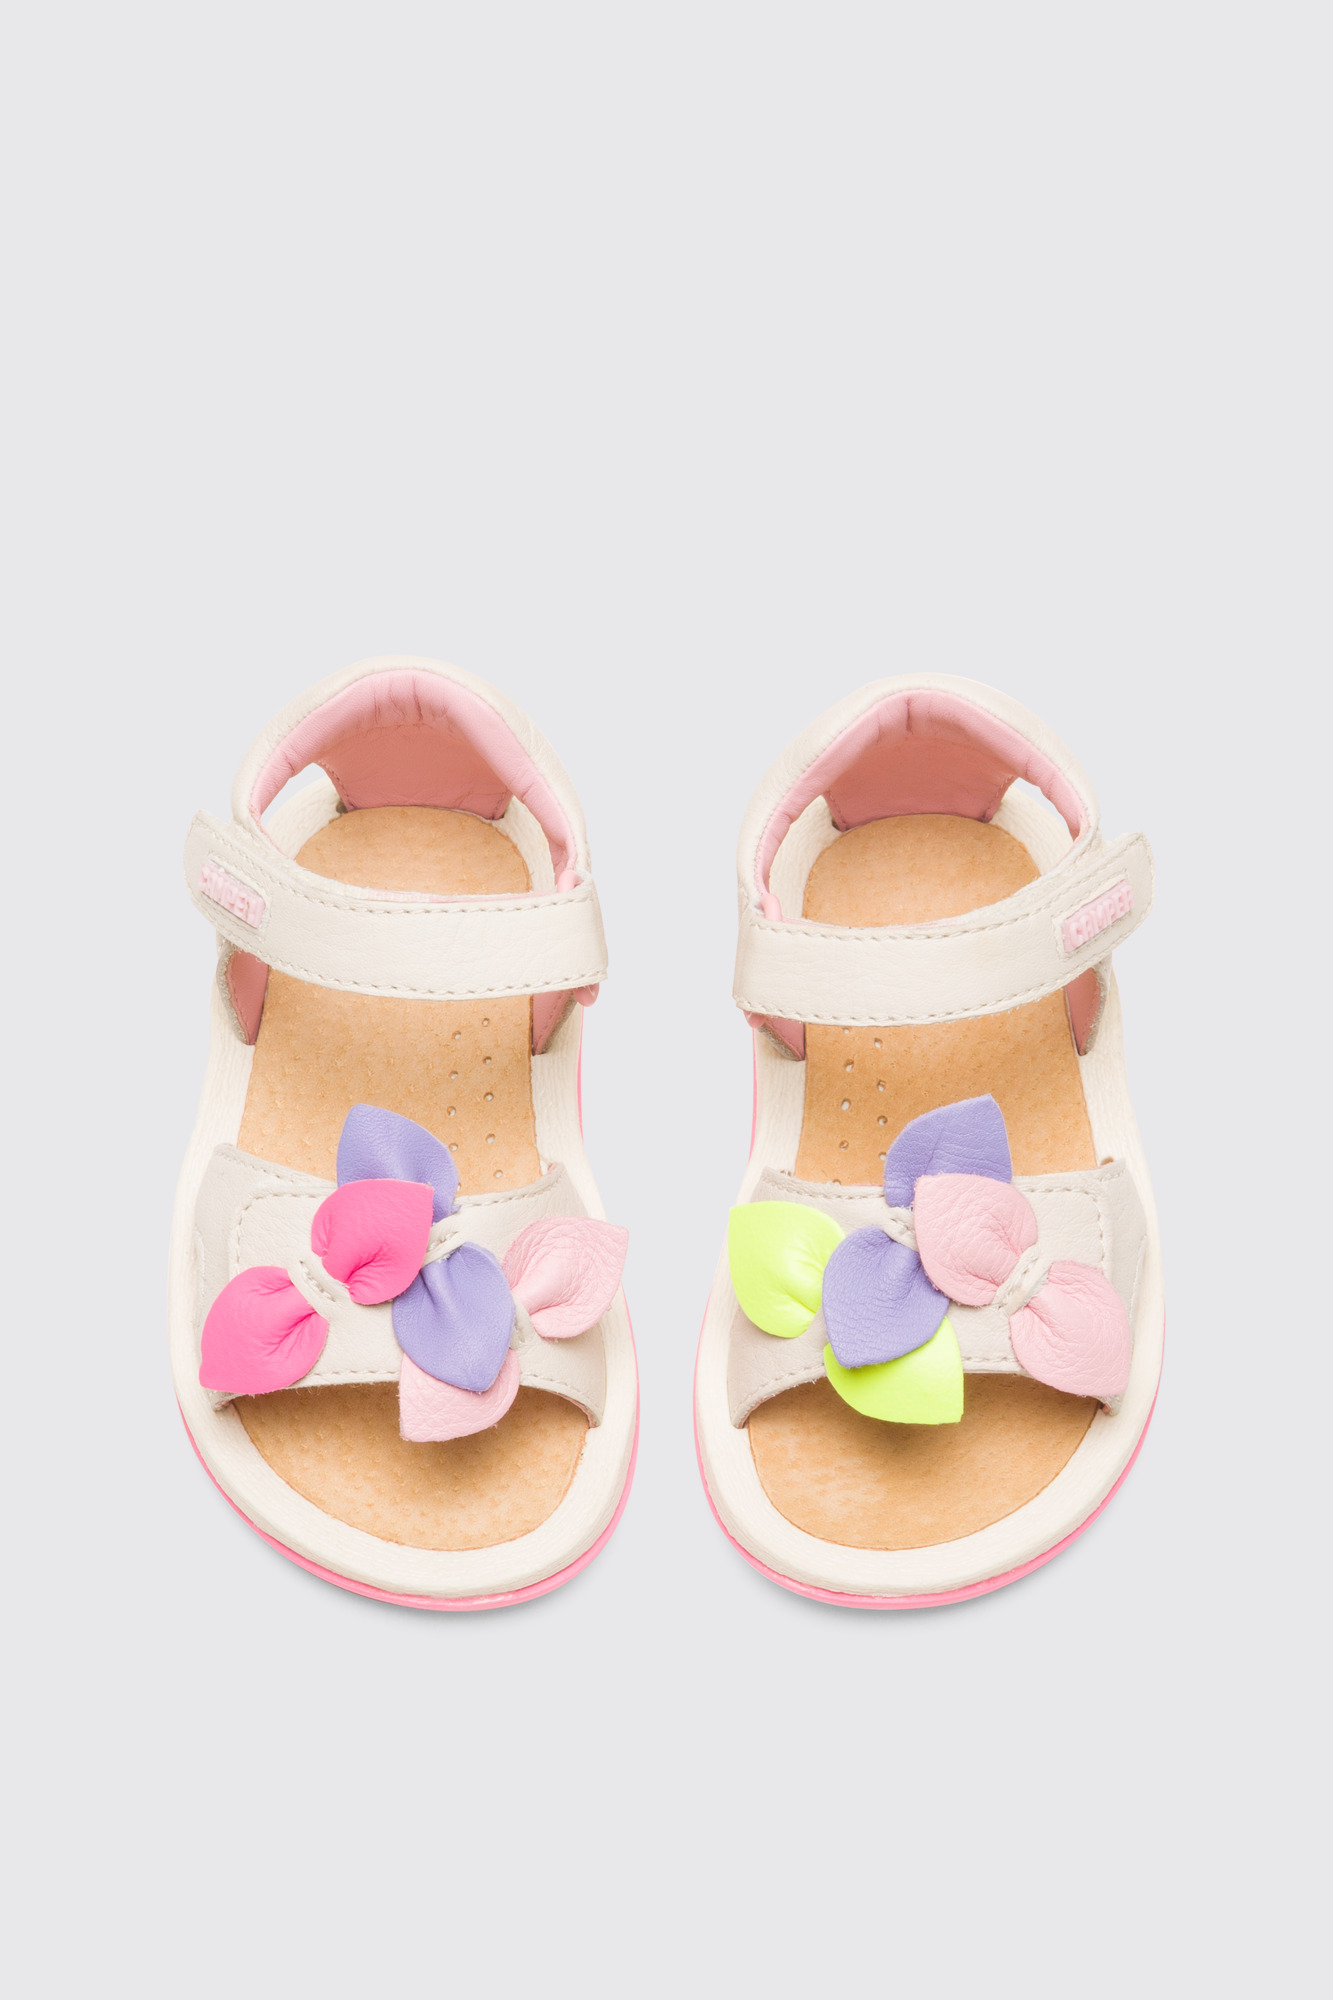 NEW Camper Twins Toddler Little Girl Leather Sandals 